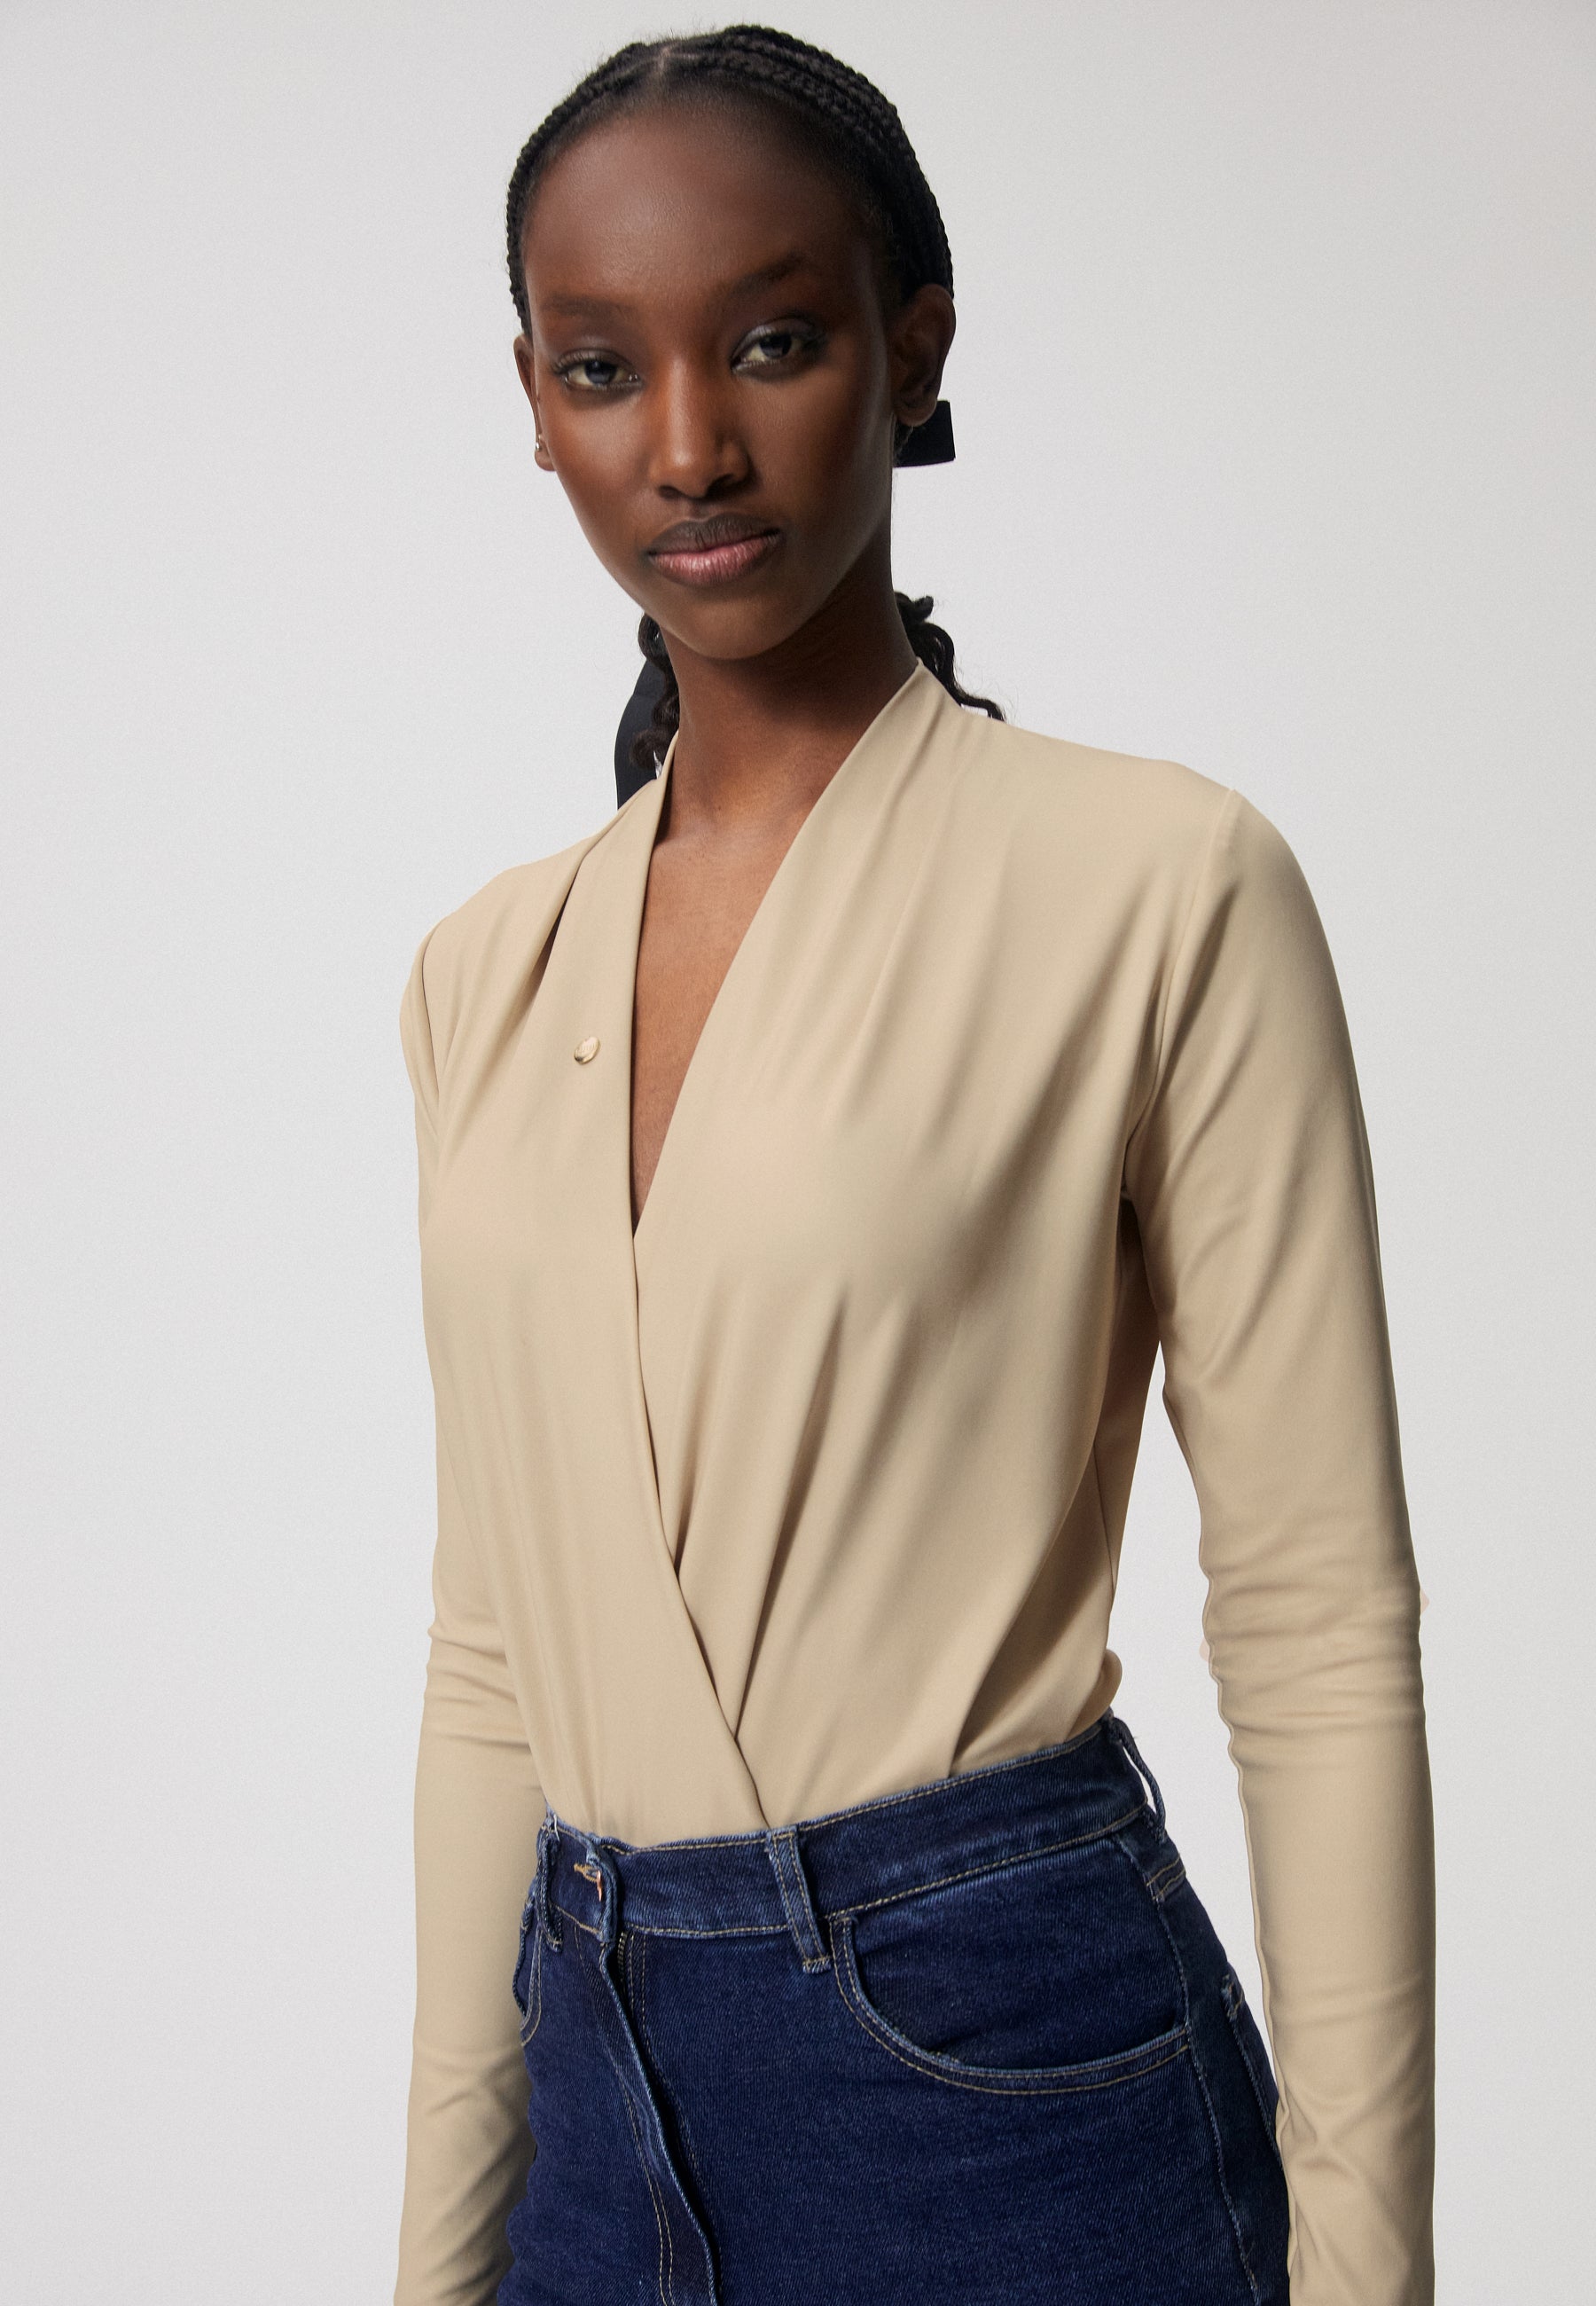  LOMMA beige bodysuit with a deep V-shaped neckline